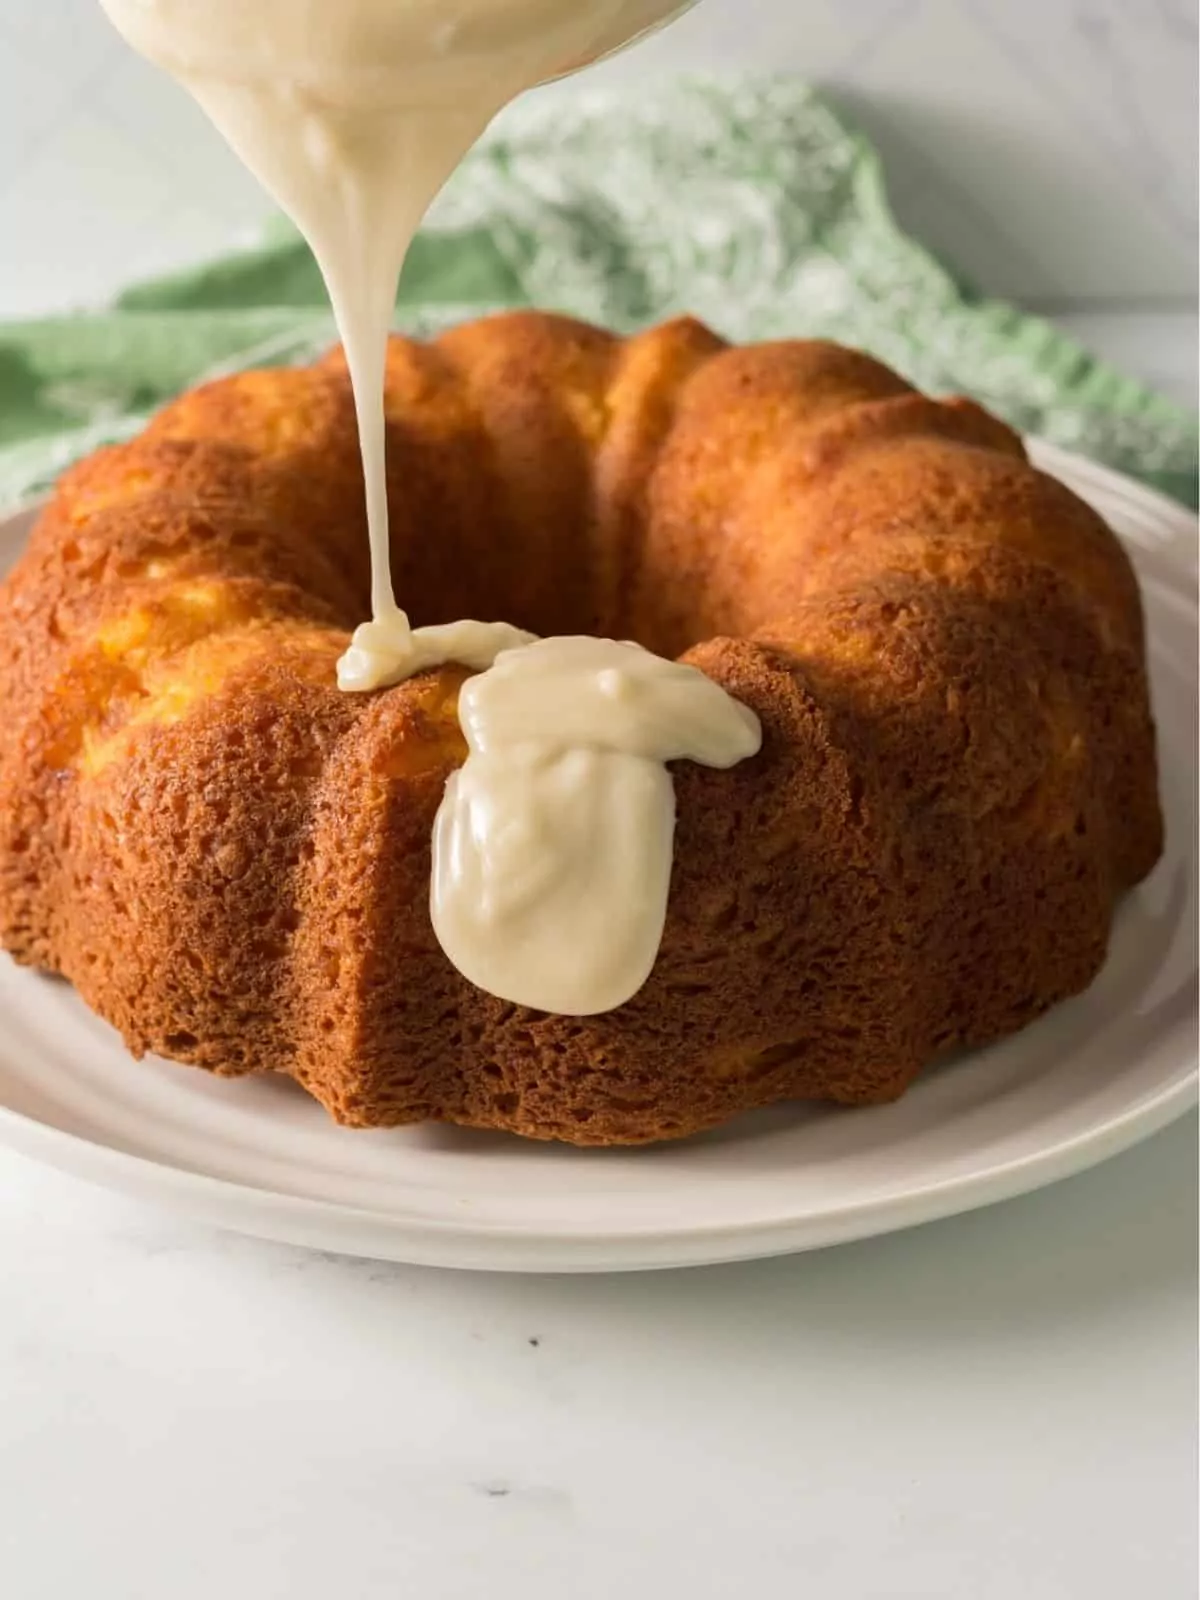 Pouring cream cheese frosting on top of peach bundt cake.